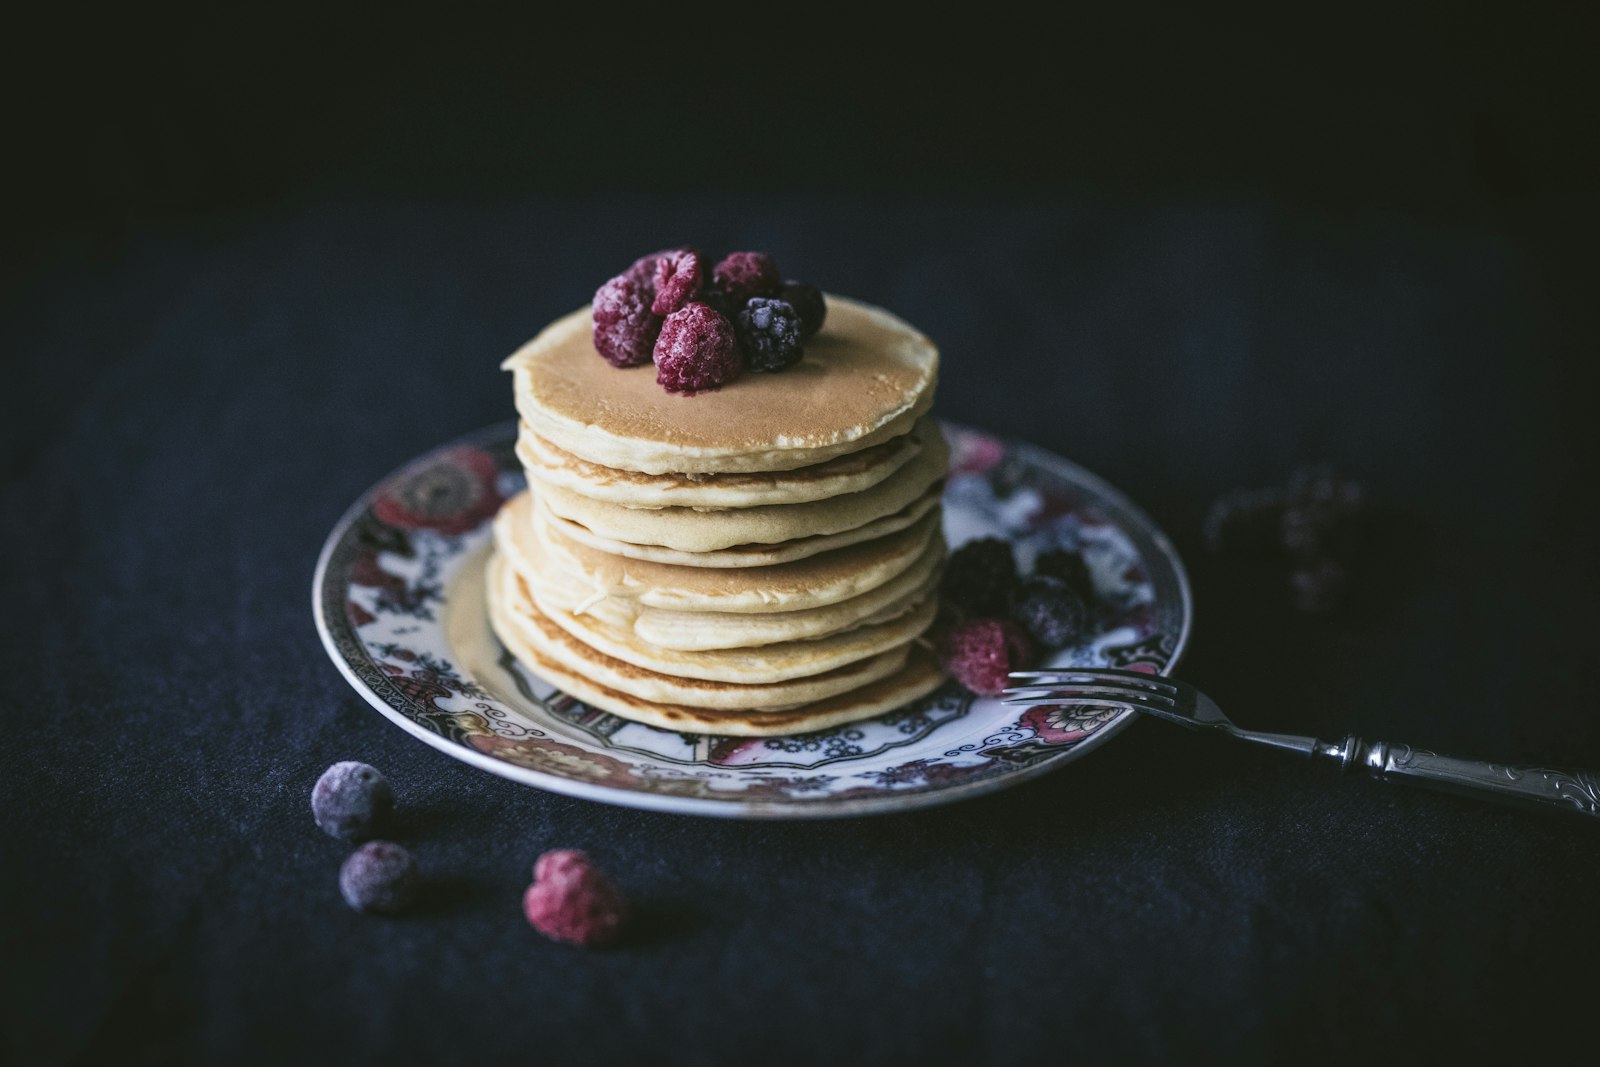 Sigma 85mm F1.4 DG HSM Art sample photo. Pancakes with raspberry toppings photography